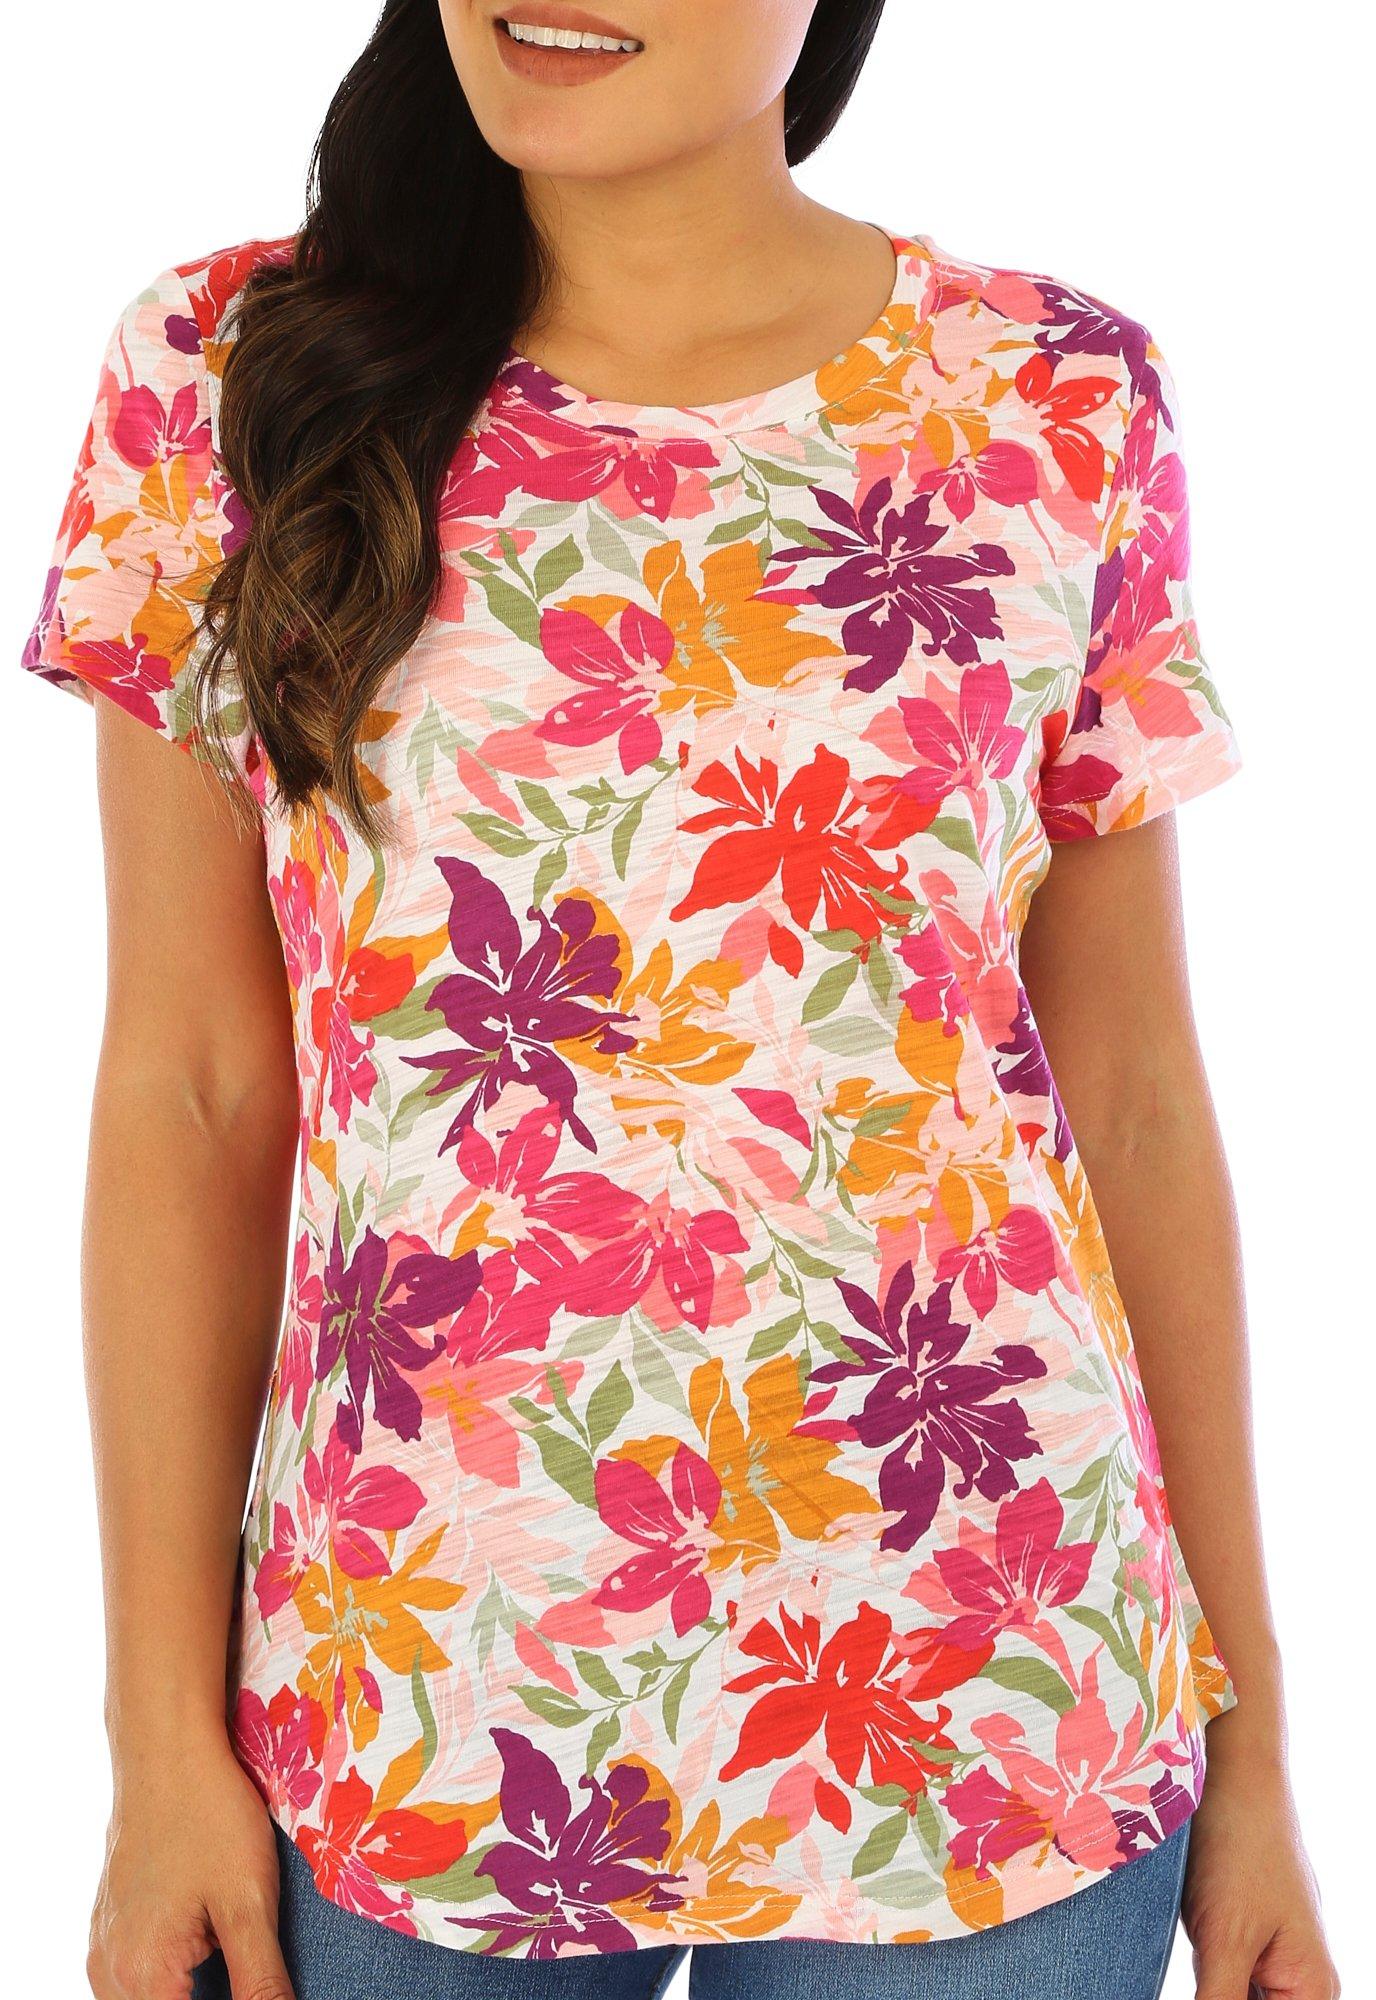 Blue Sol Womens Layered Floral Short Sleeve Top